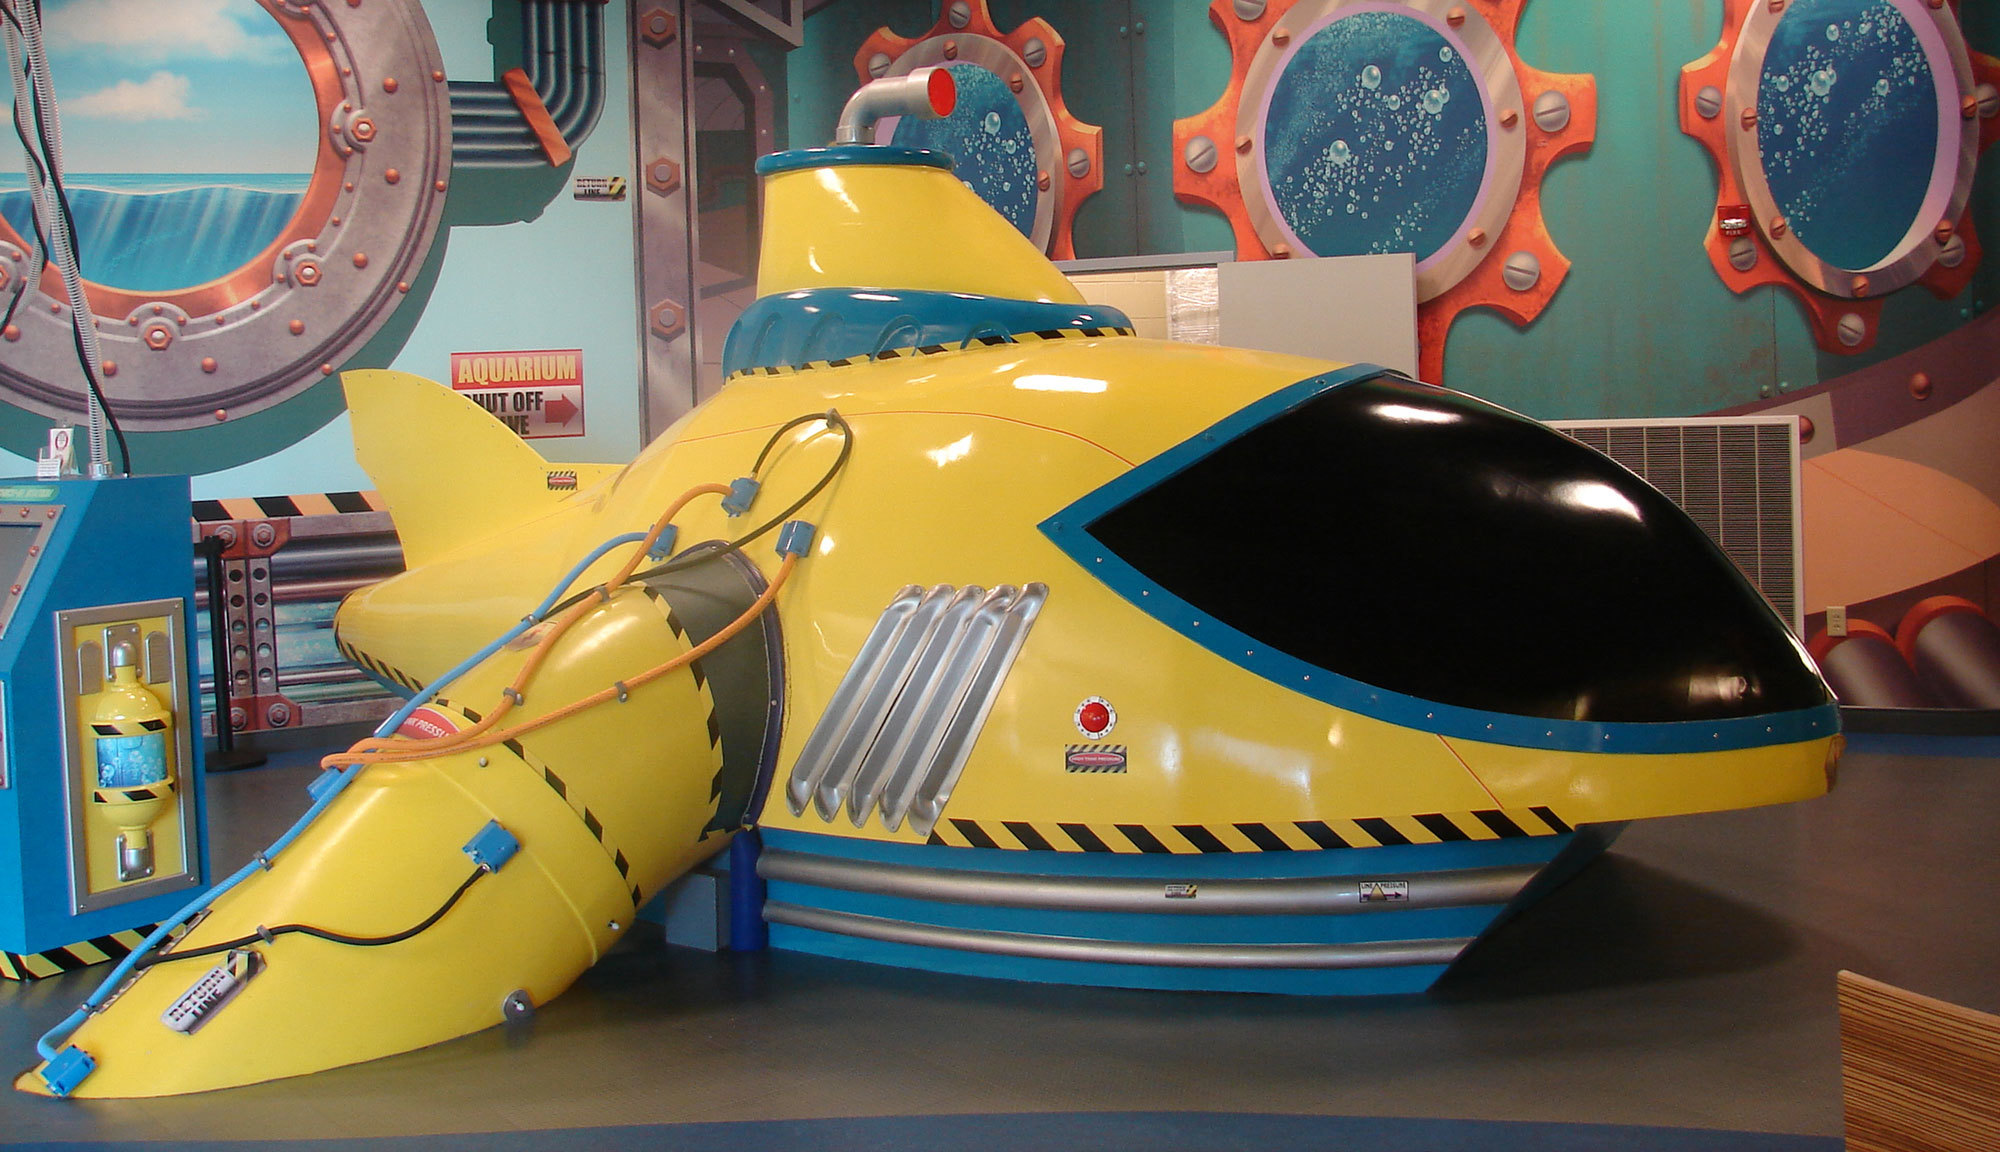 3D Sculpted Yellow Submarine in Undersea Themed Space with porthole murals behind it.